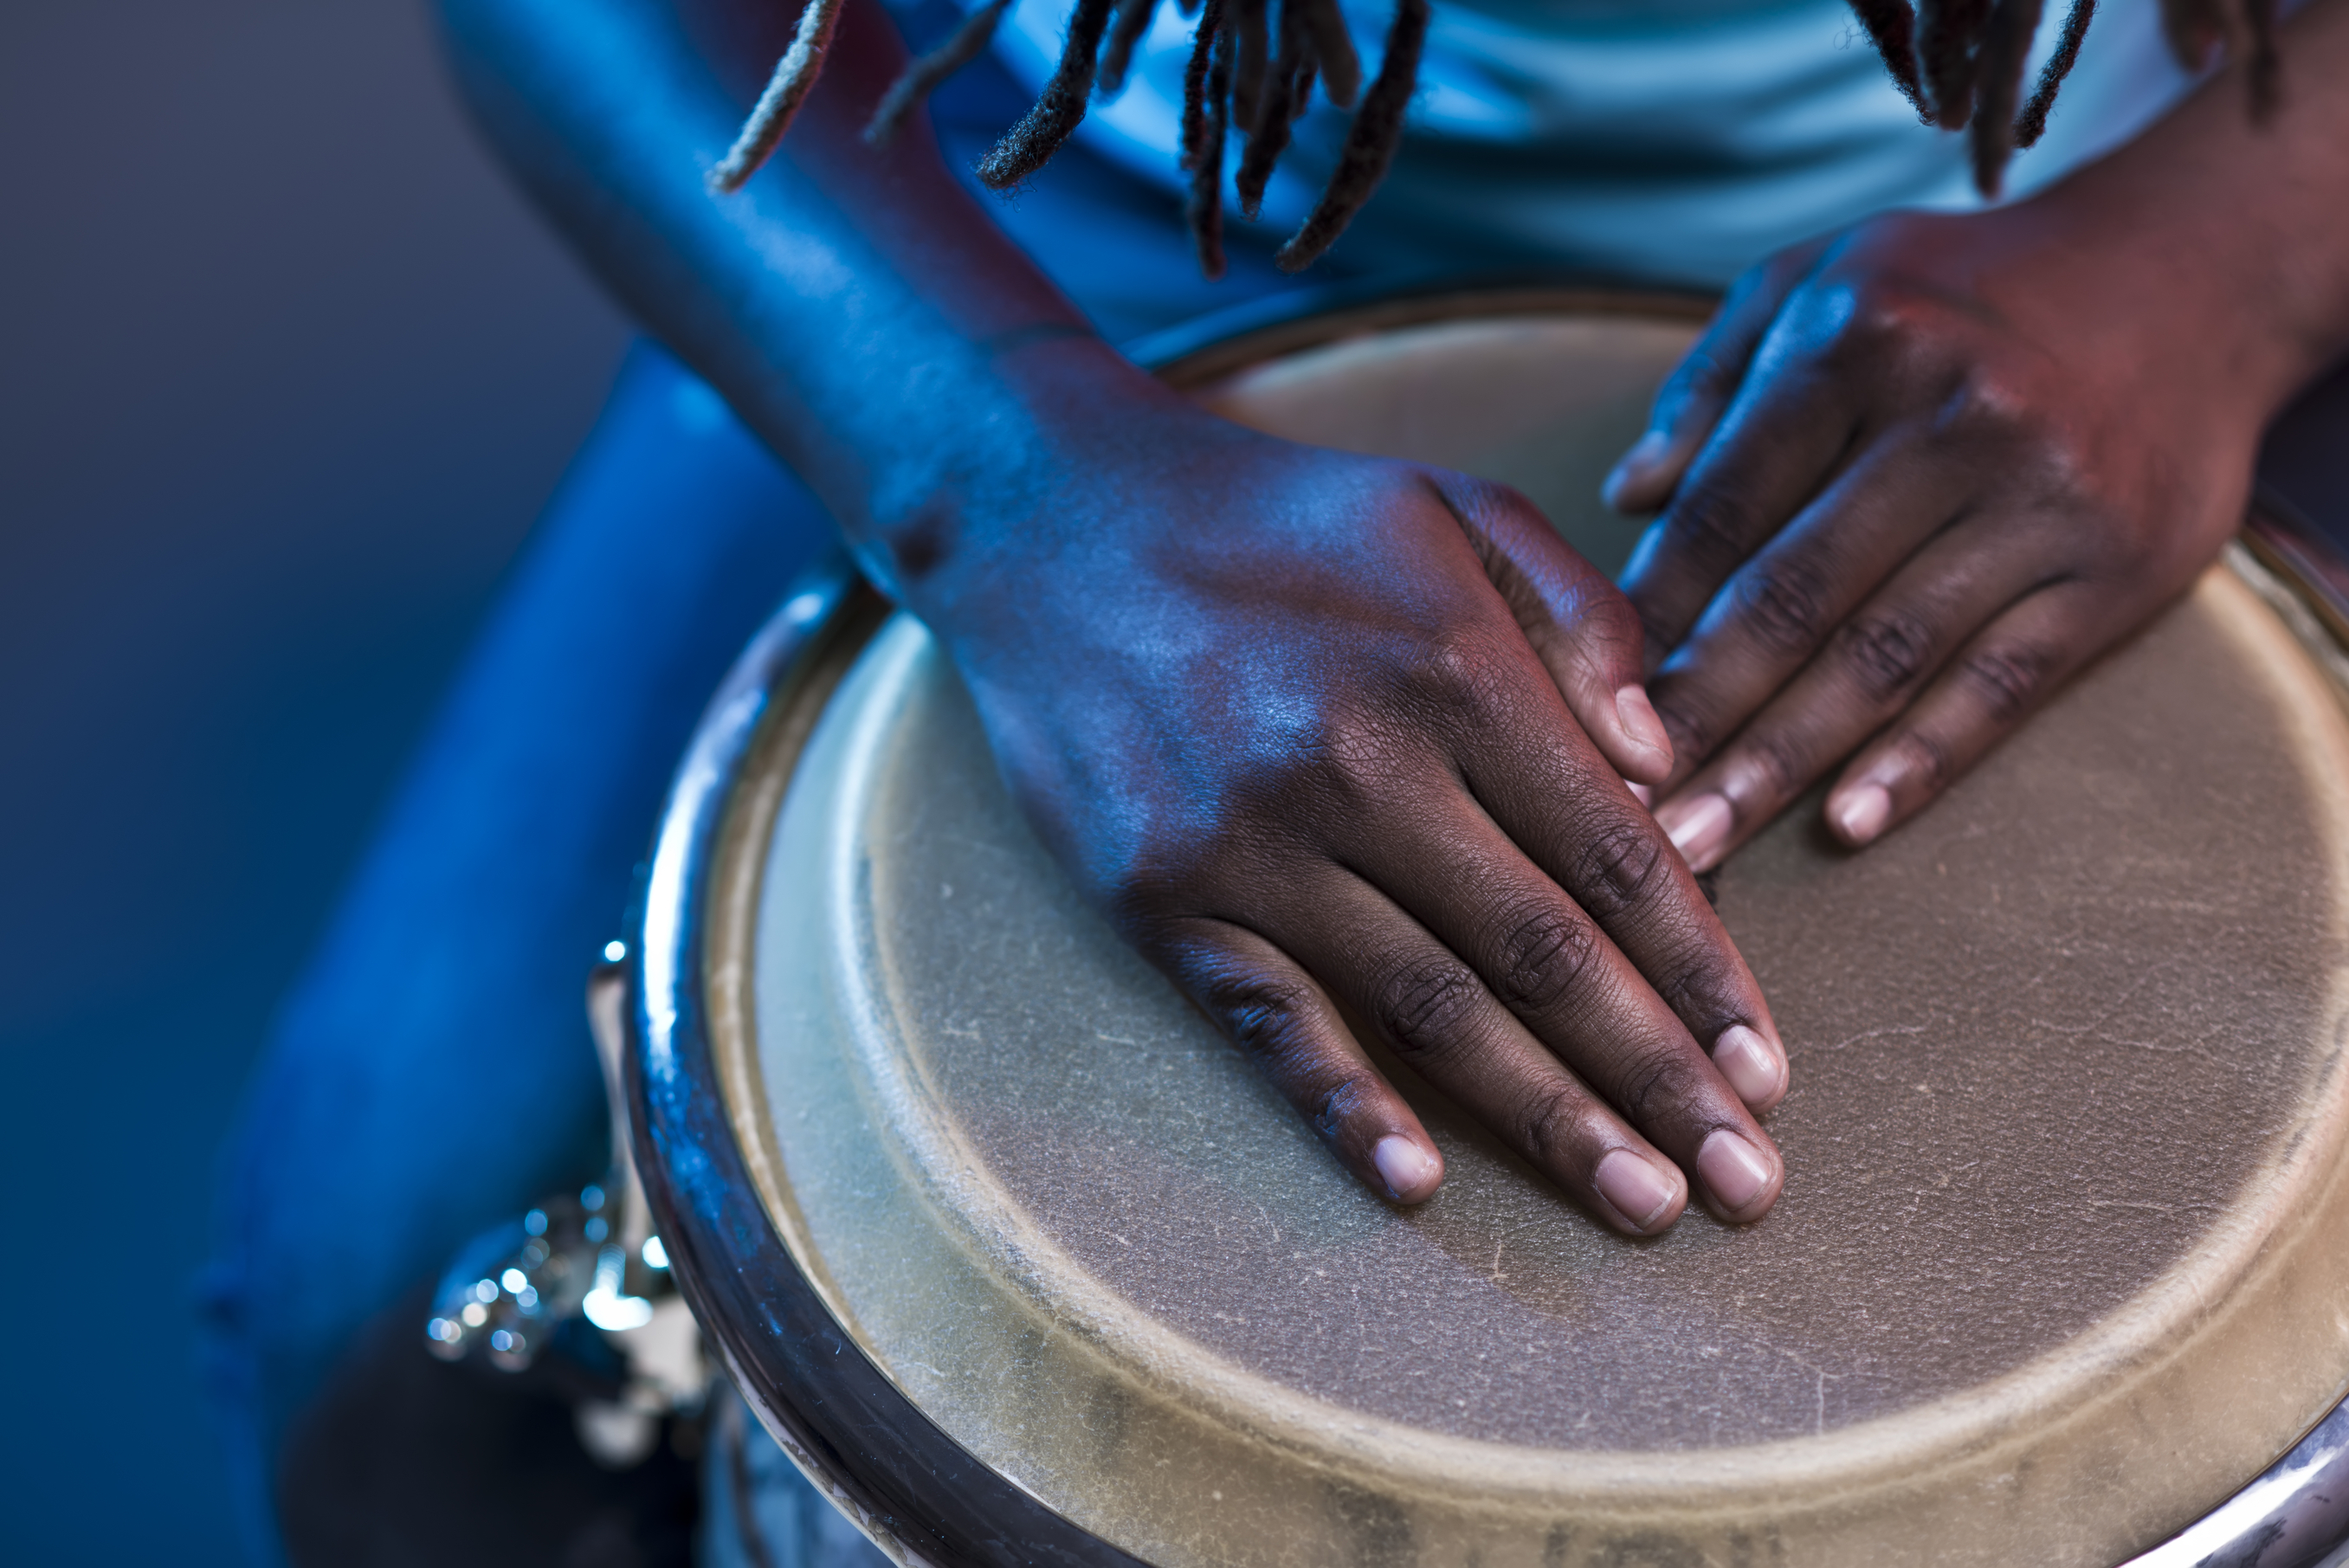 Drum Circles: The Therapeutic Effect of Drumming